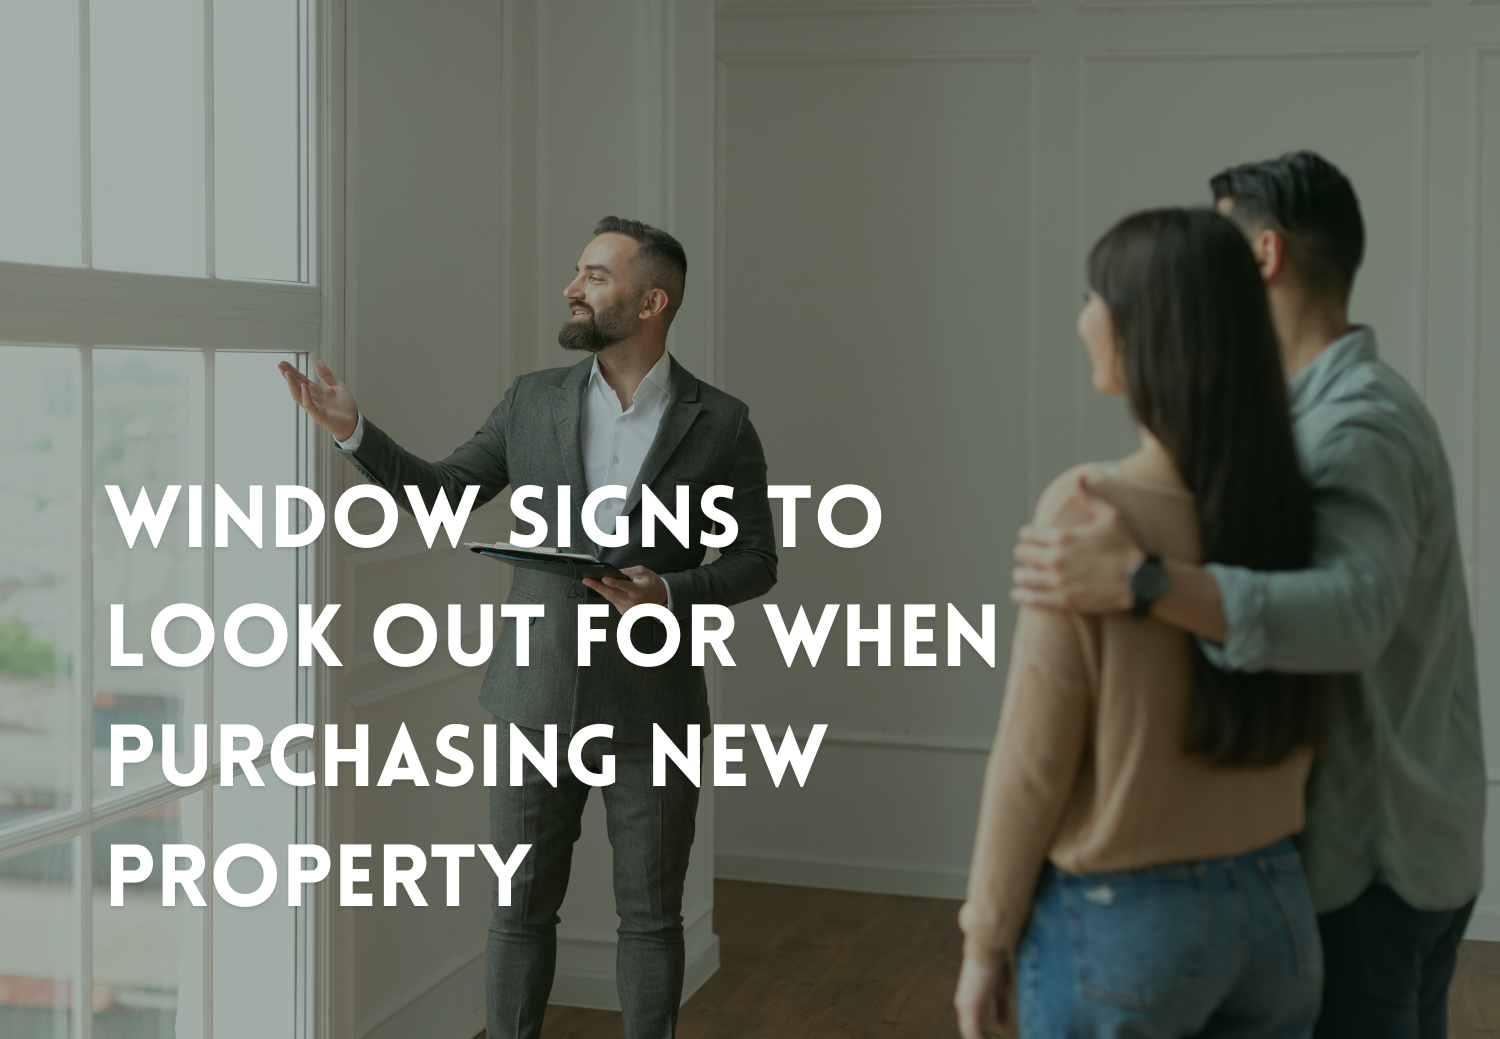 Window Signs to Look Out for when Purchasing New Property